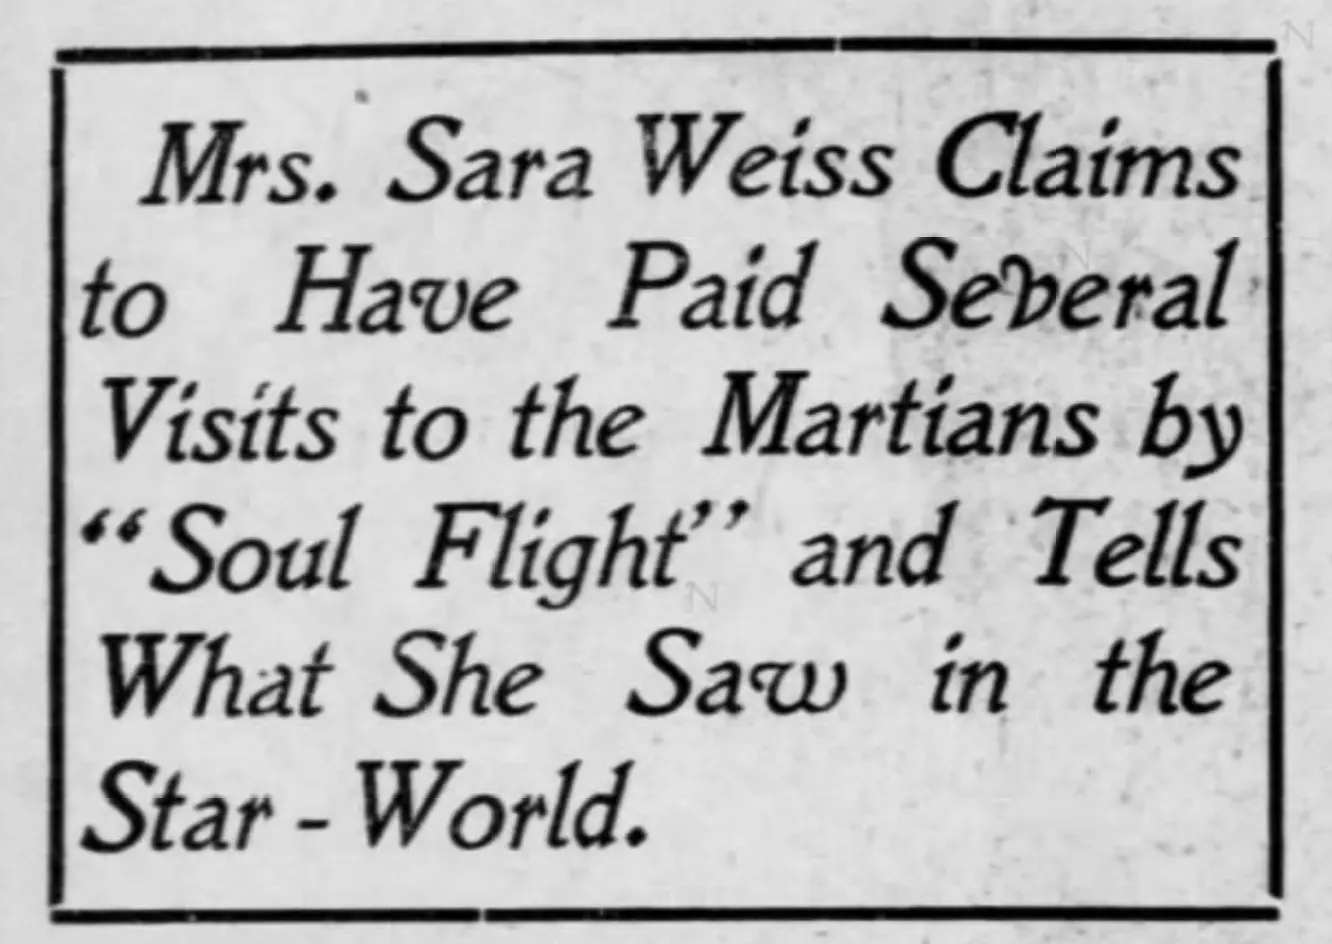 Summary of Journeys to the Planet Mars in the St. Louis Dispatch, 1903